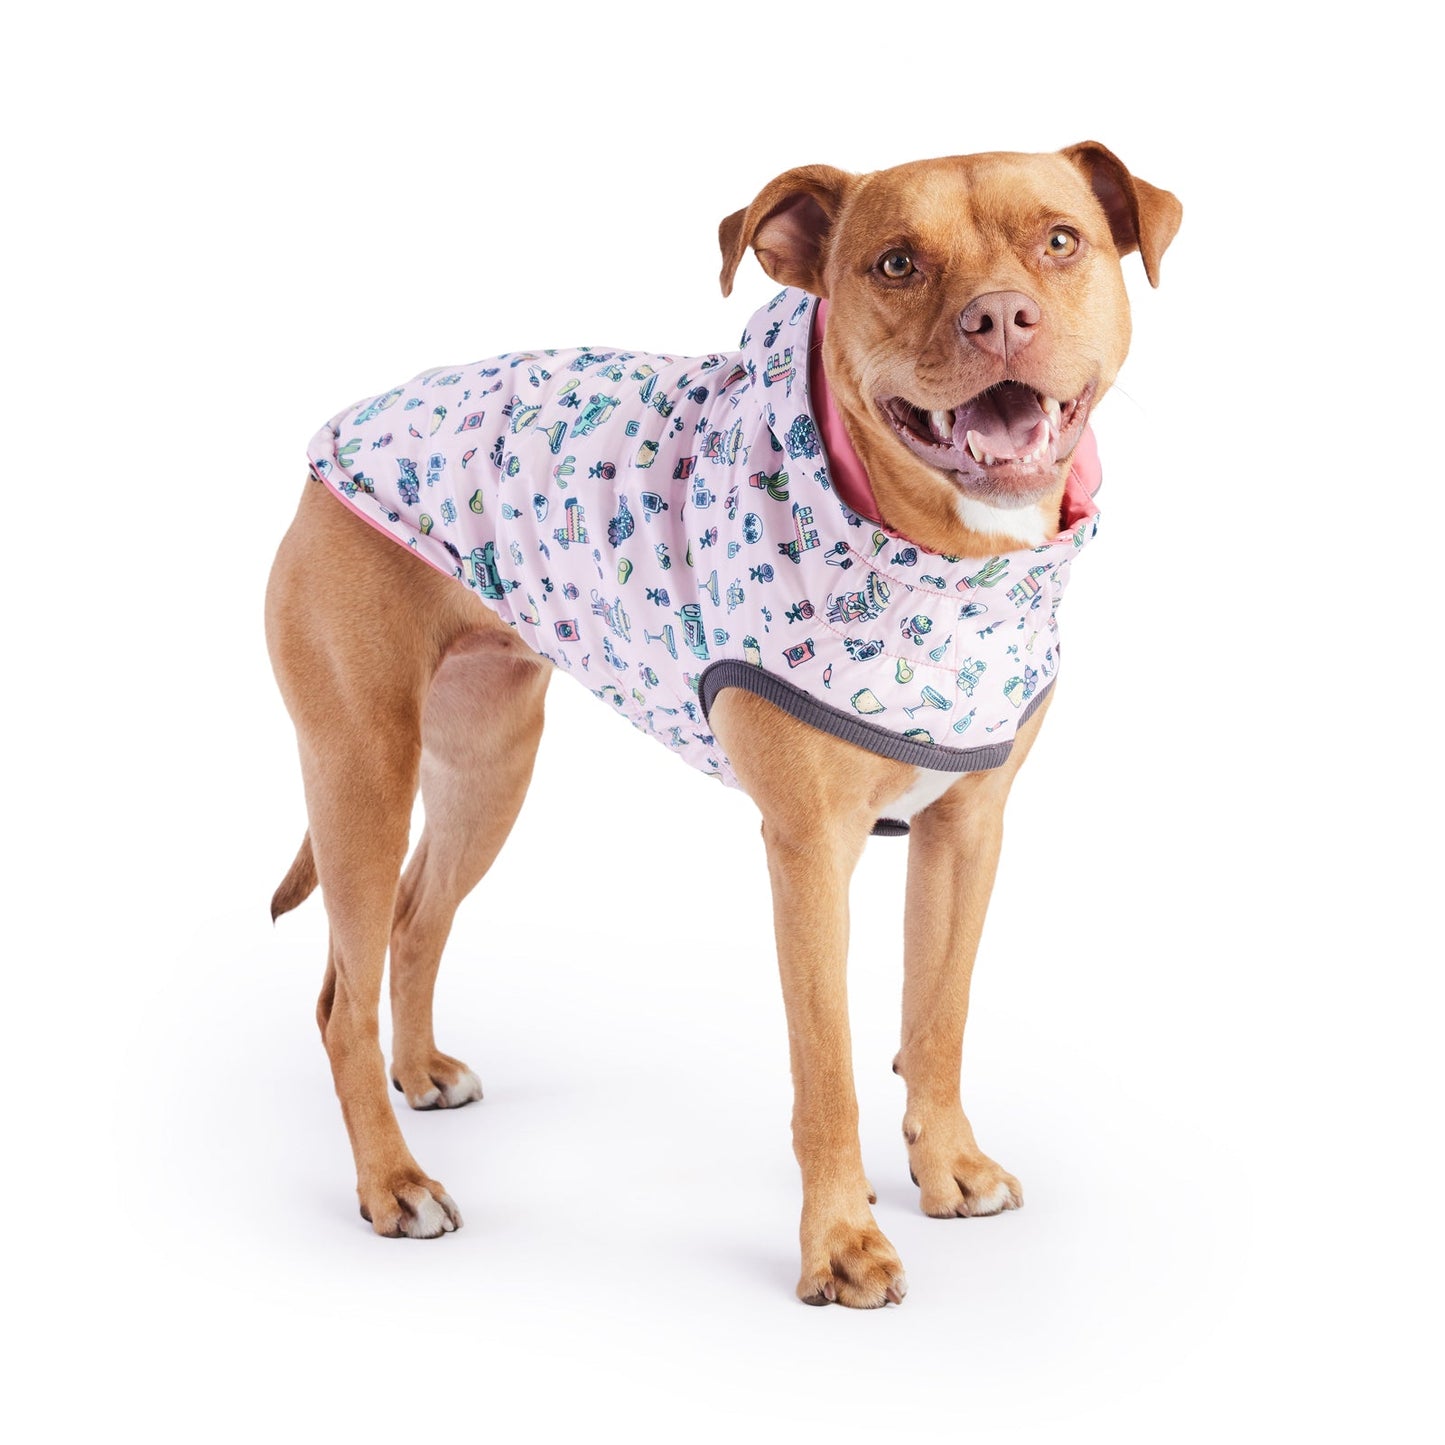 A golden pit bull type dog standing, wearing a light pink raincoat with Mexico-themed print